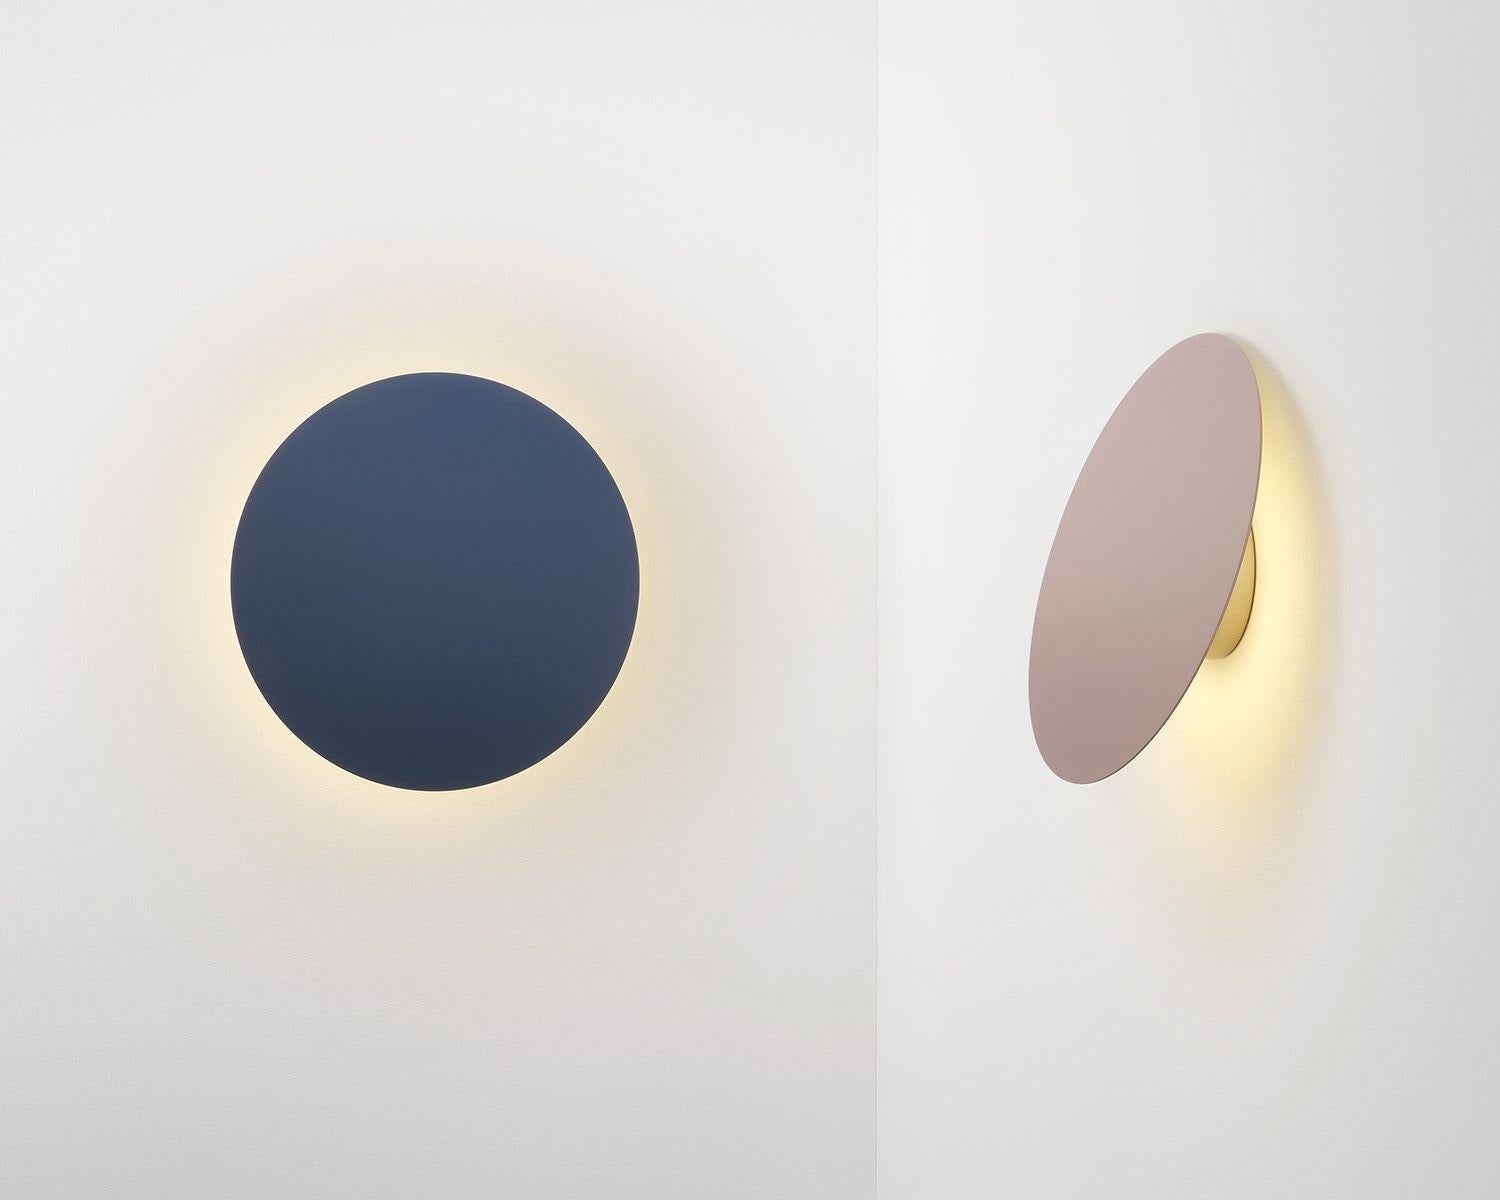 The circular motif of the polar is synonymous in its minimal operative form. The product utilizes a unique hinge joint allowing the shade disc to pivot up or down, softly directing the light output as desired. Polar Wall's anodized gold wall canopy